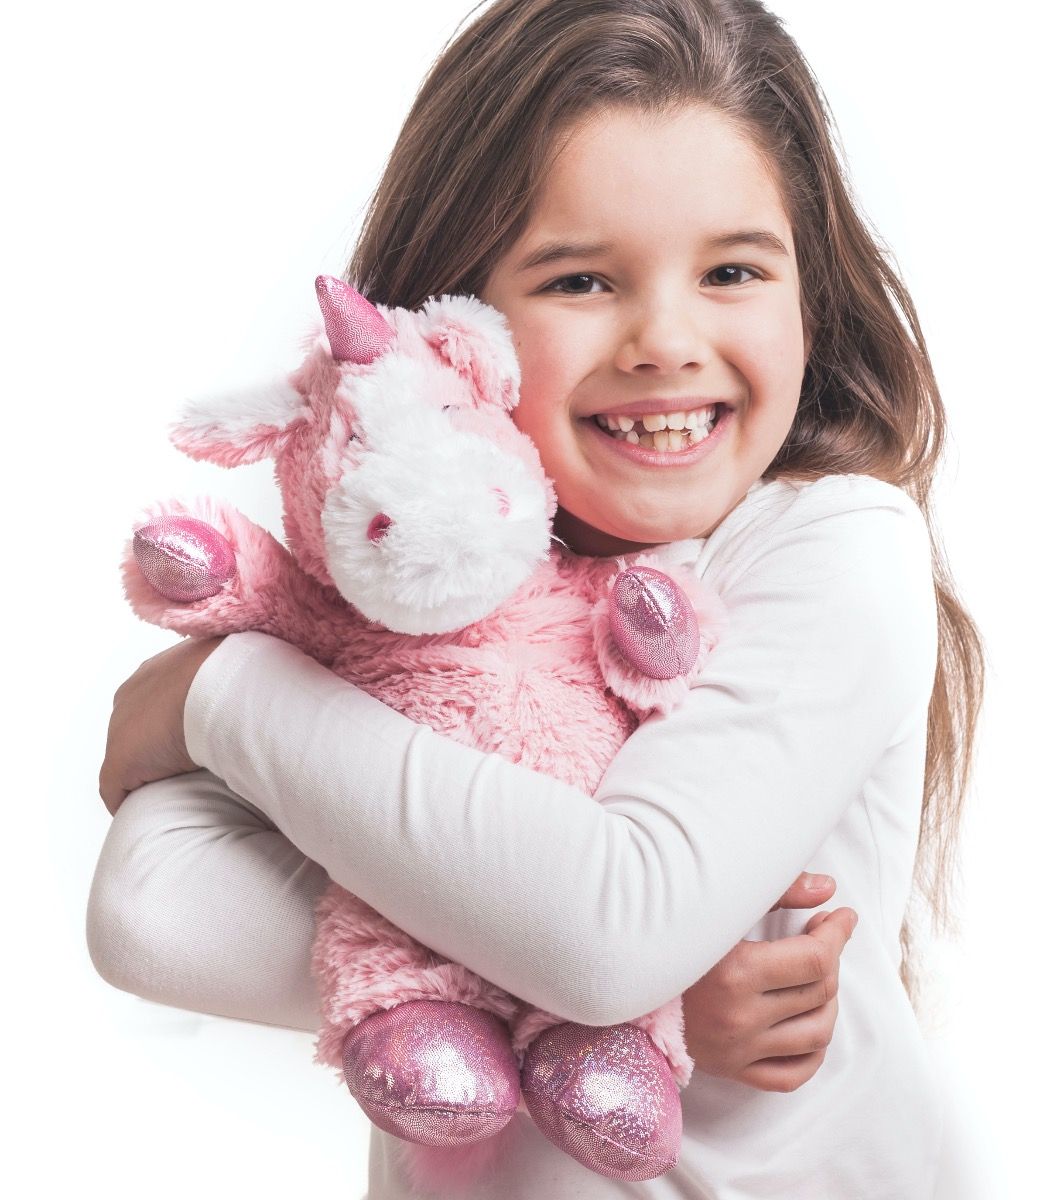 Sparkly Unicorn Microwavable Soft Toy